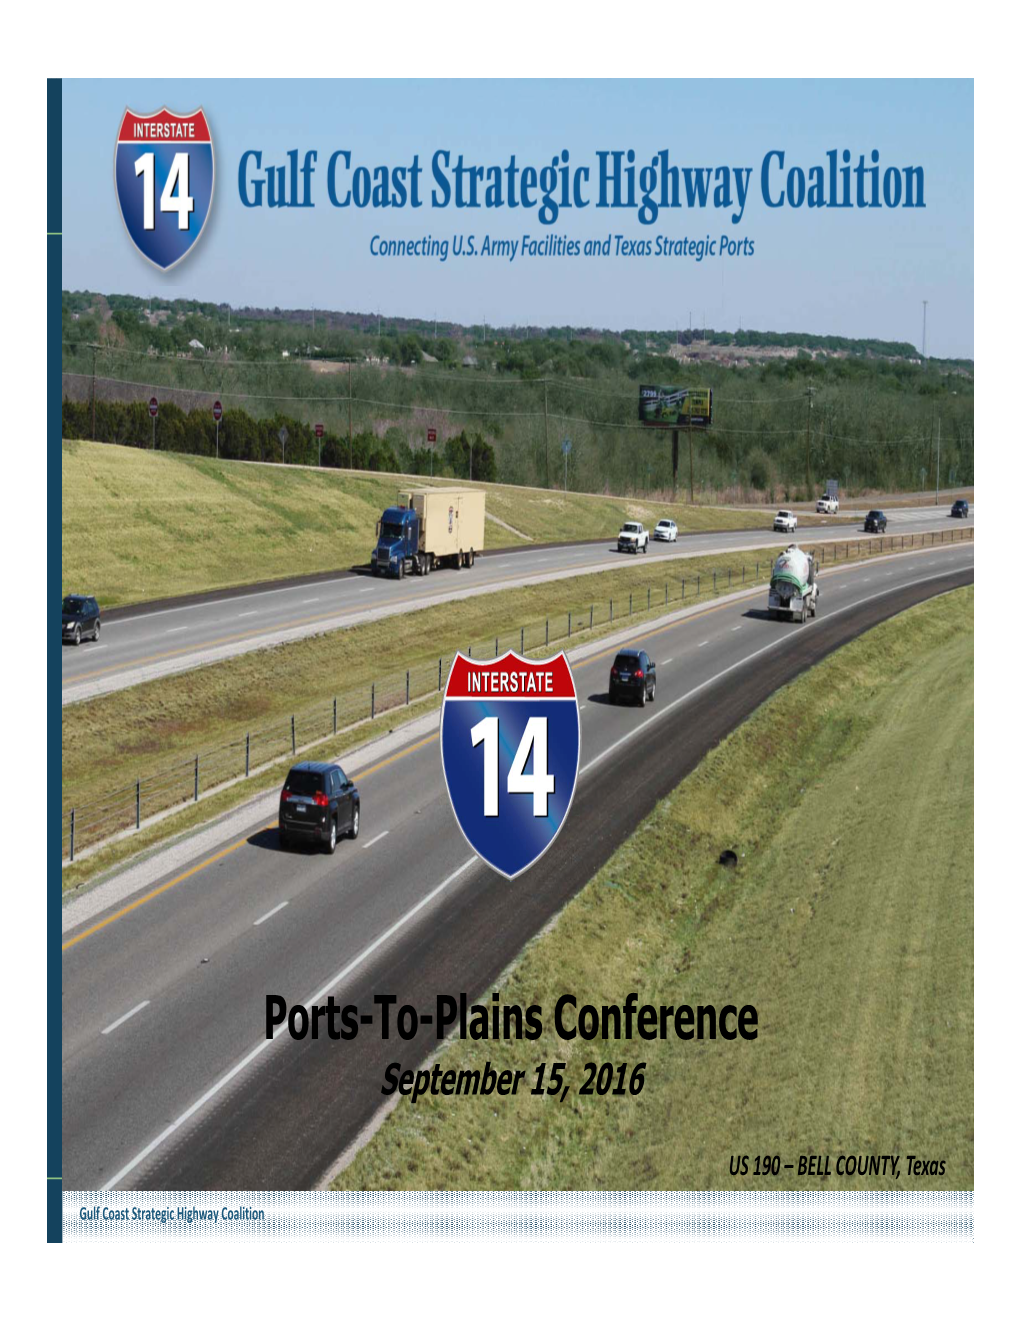 Ports-To-Plains Conference September 15, 2016